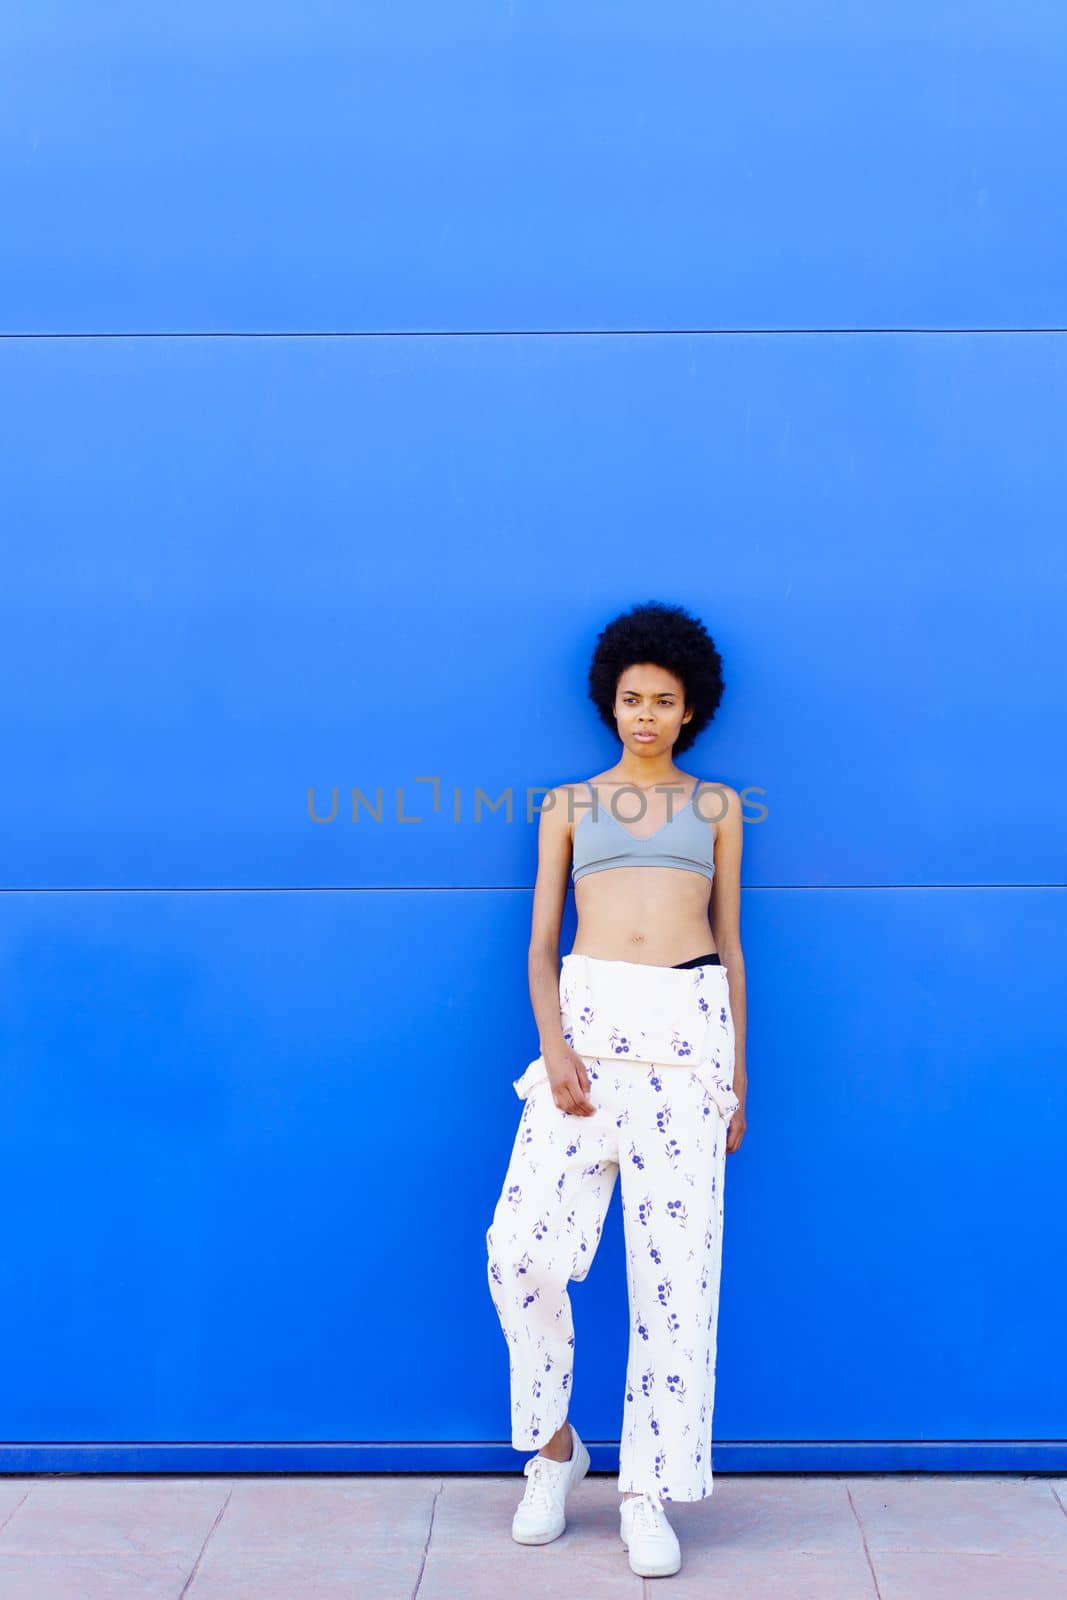 Full body of fit African American female in bra and overall looking away while standing on blue background in city